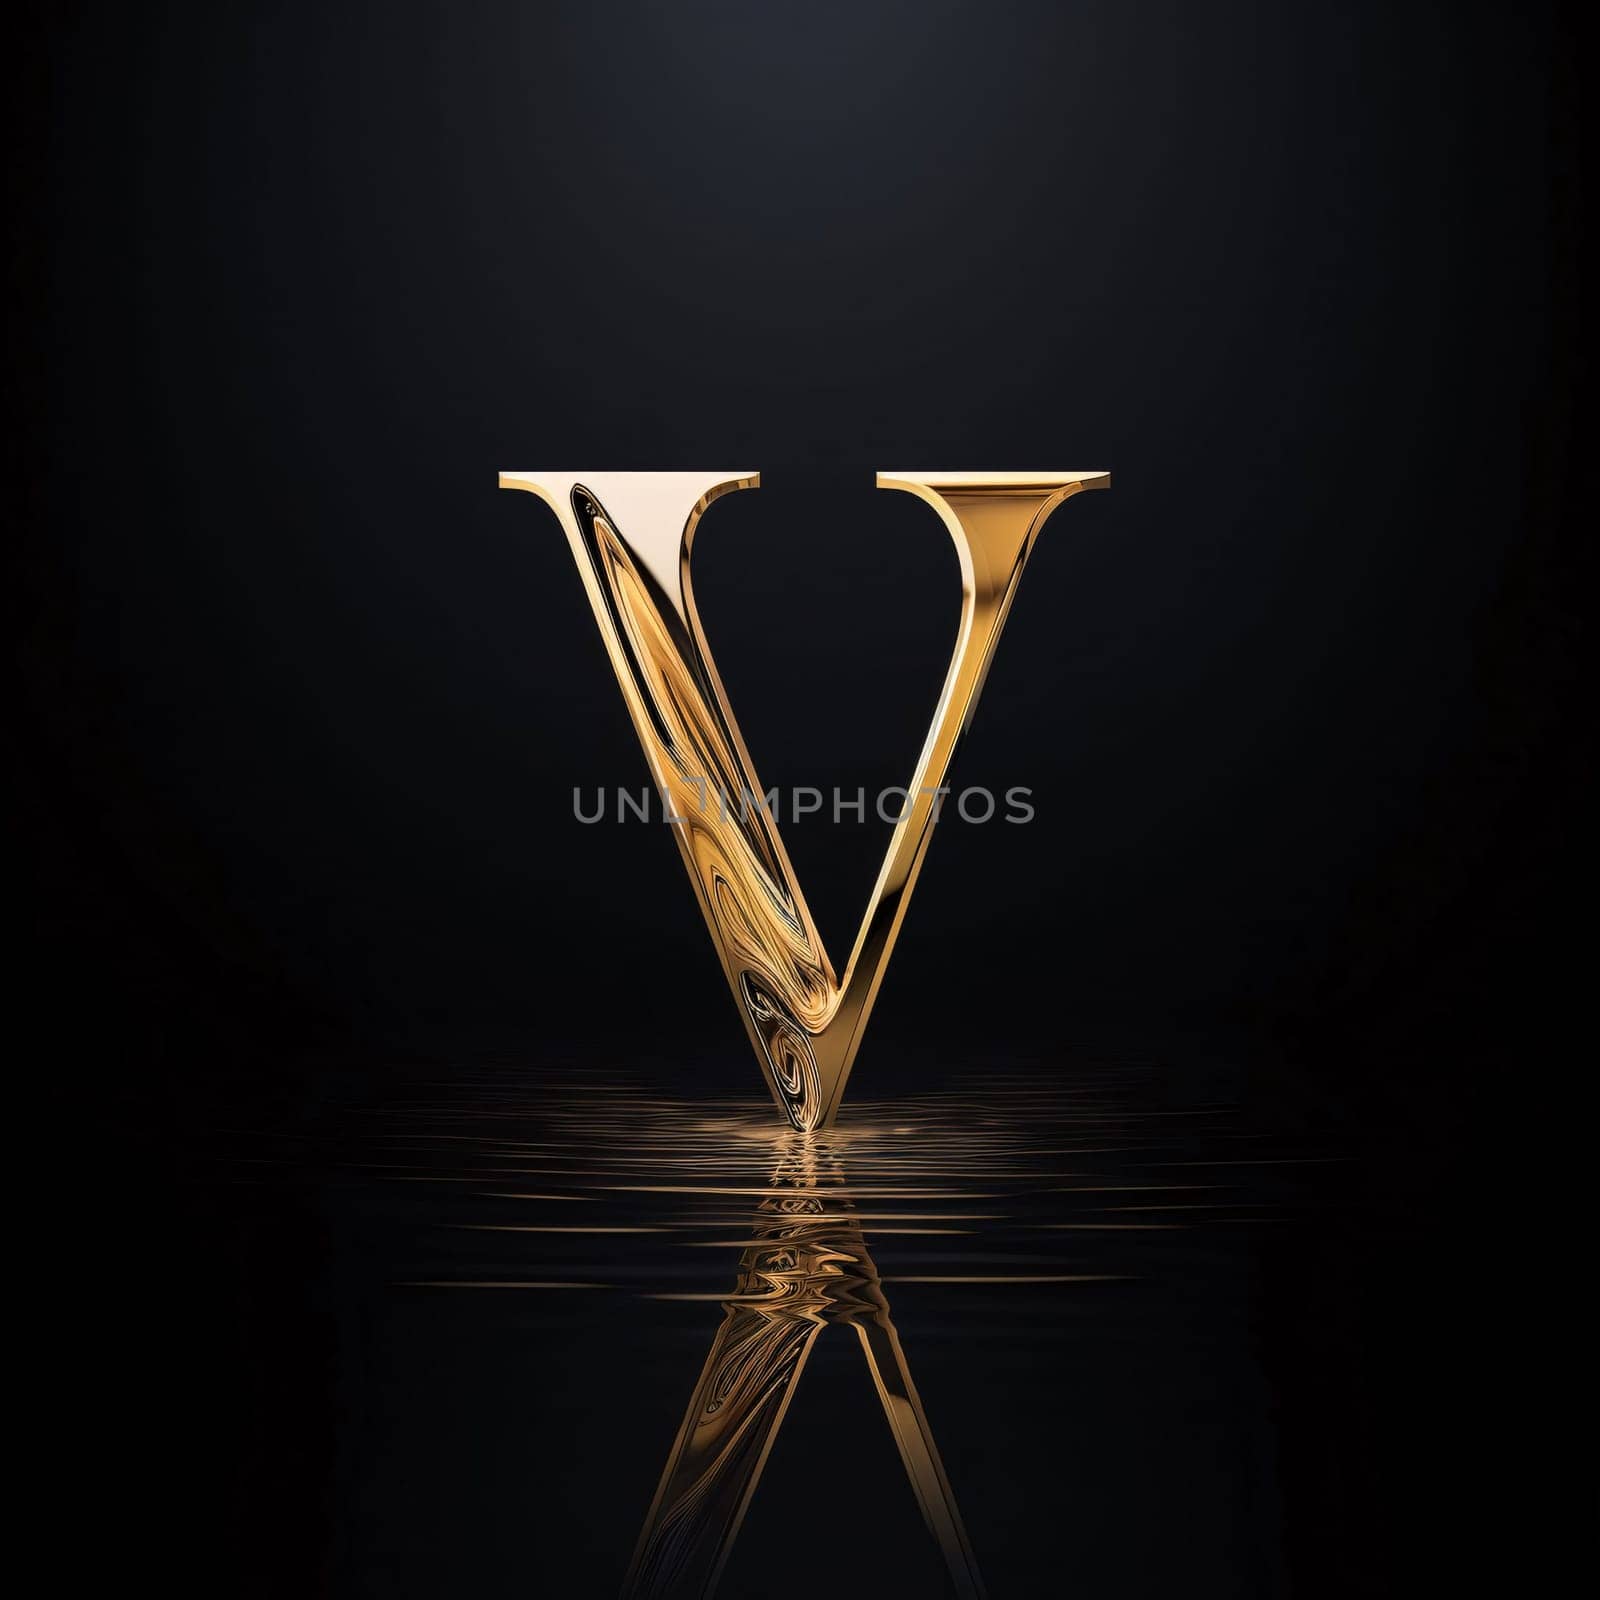 Graphic alphabet letters: elegant and classic gold letter V isolated on black with reflection